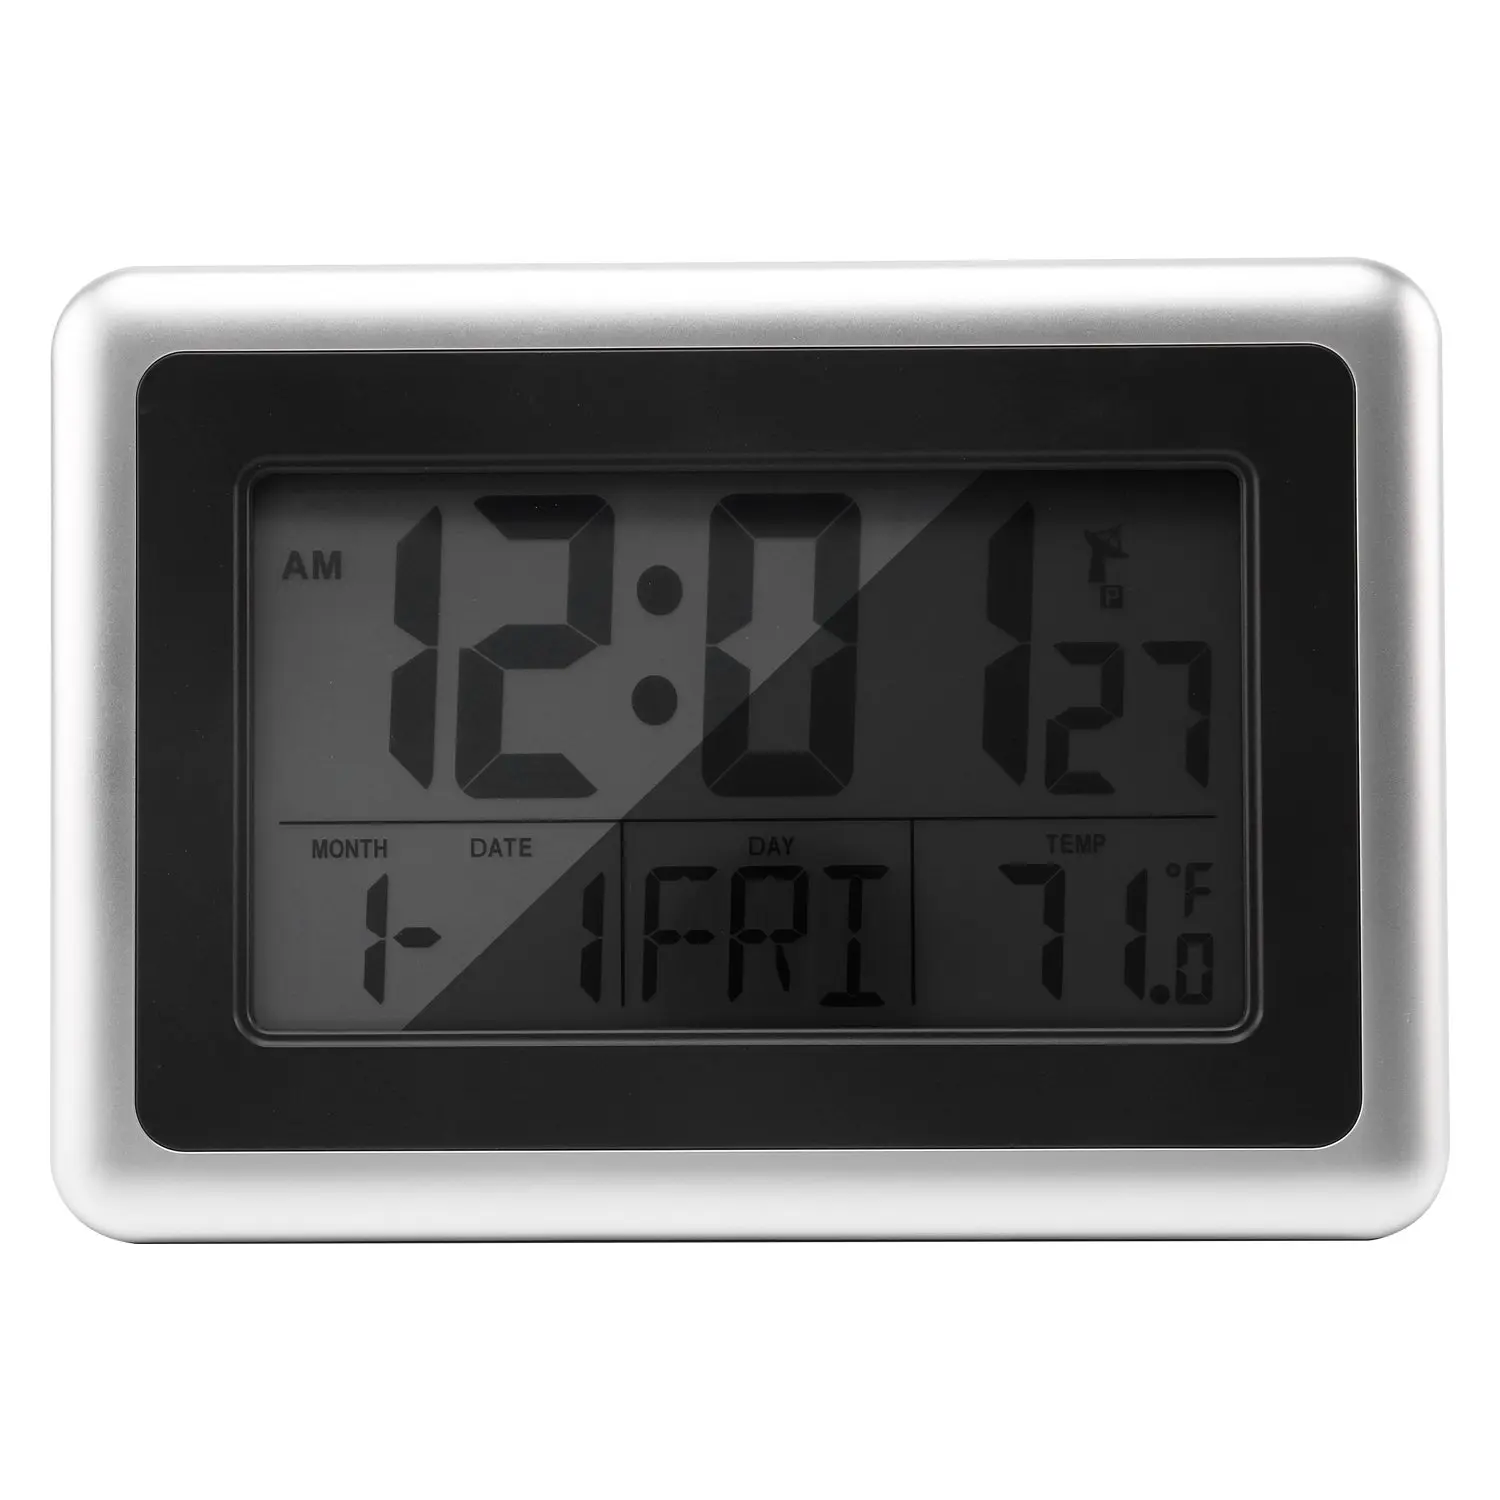 

Atomic Digital Wall Clock Large Lcd Display Battery Operated Indoor Temperature Calendar Table Standing Snooze Without Back L